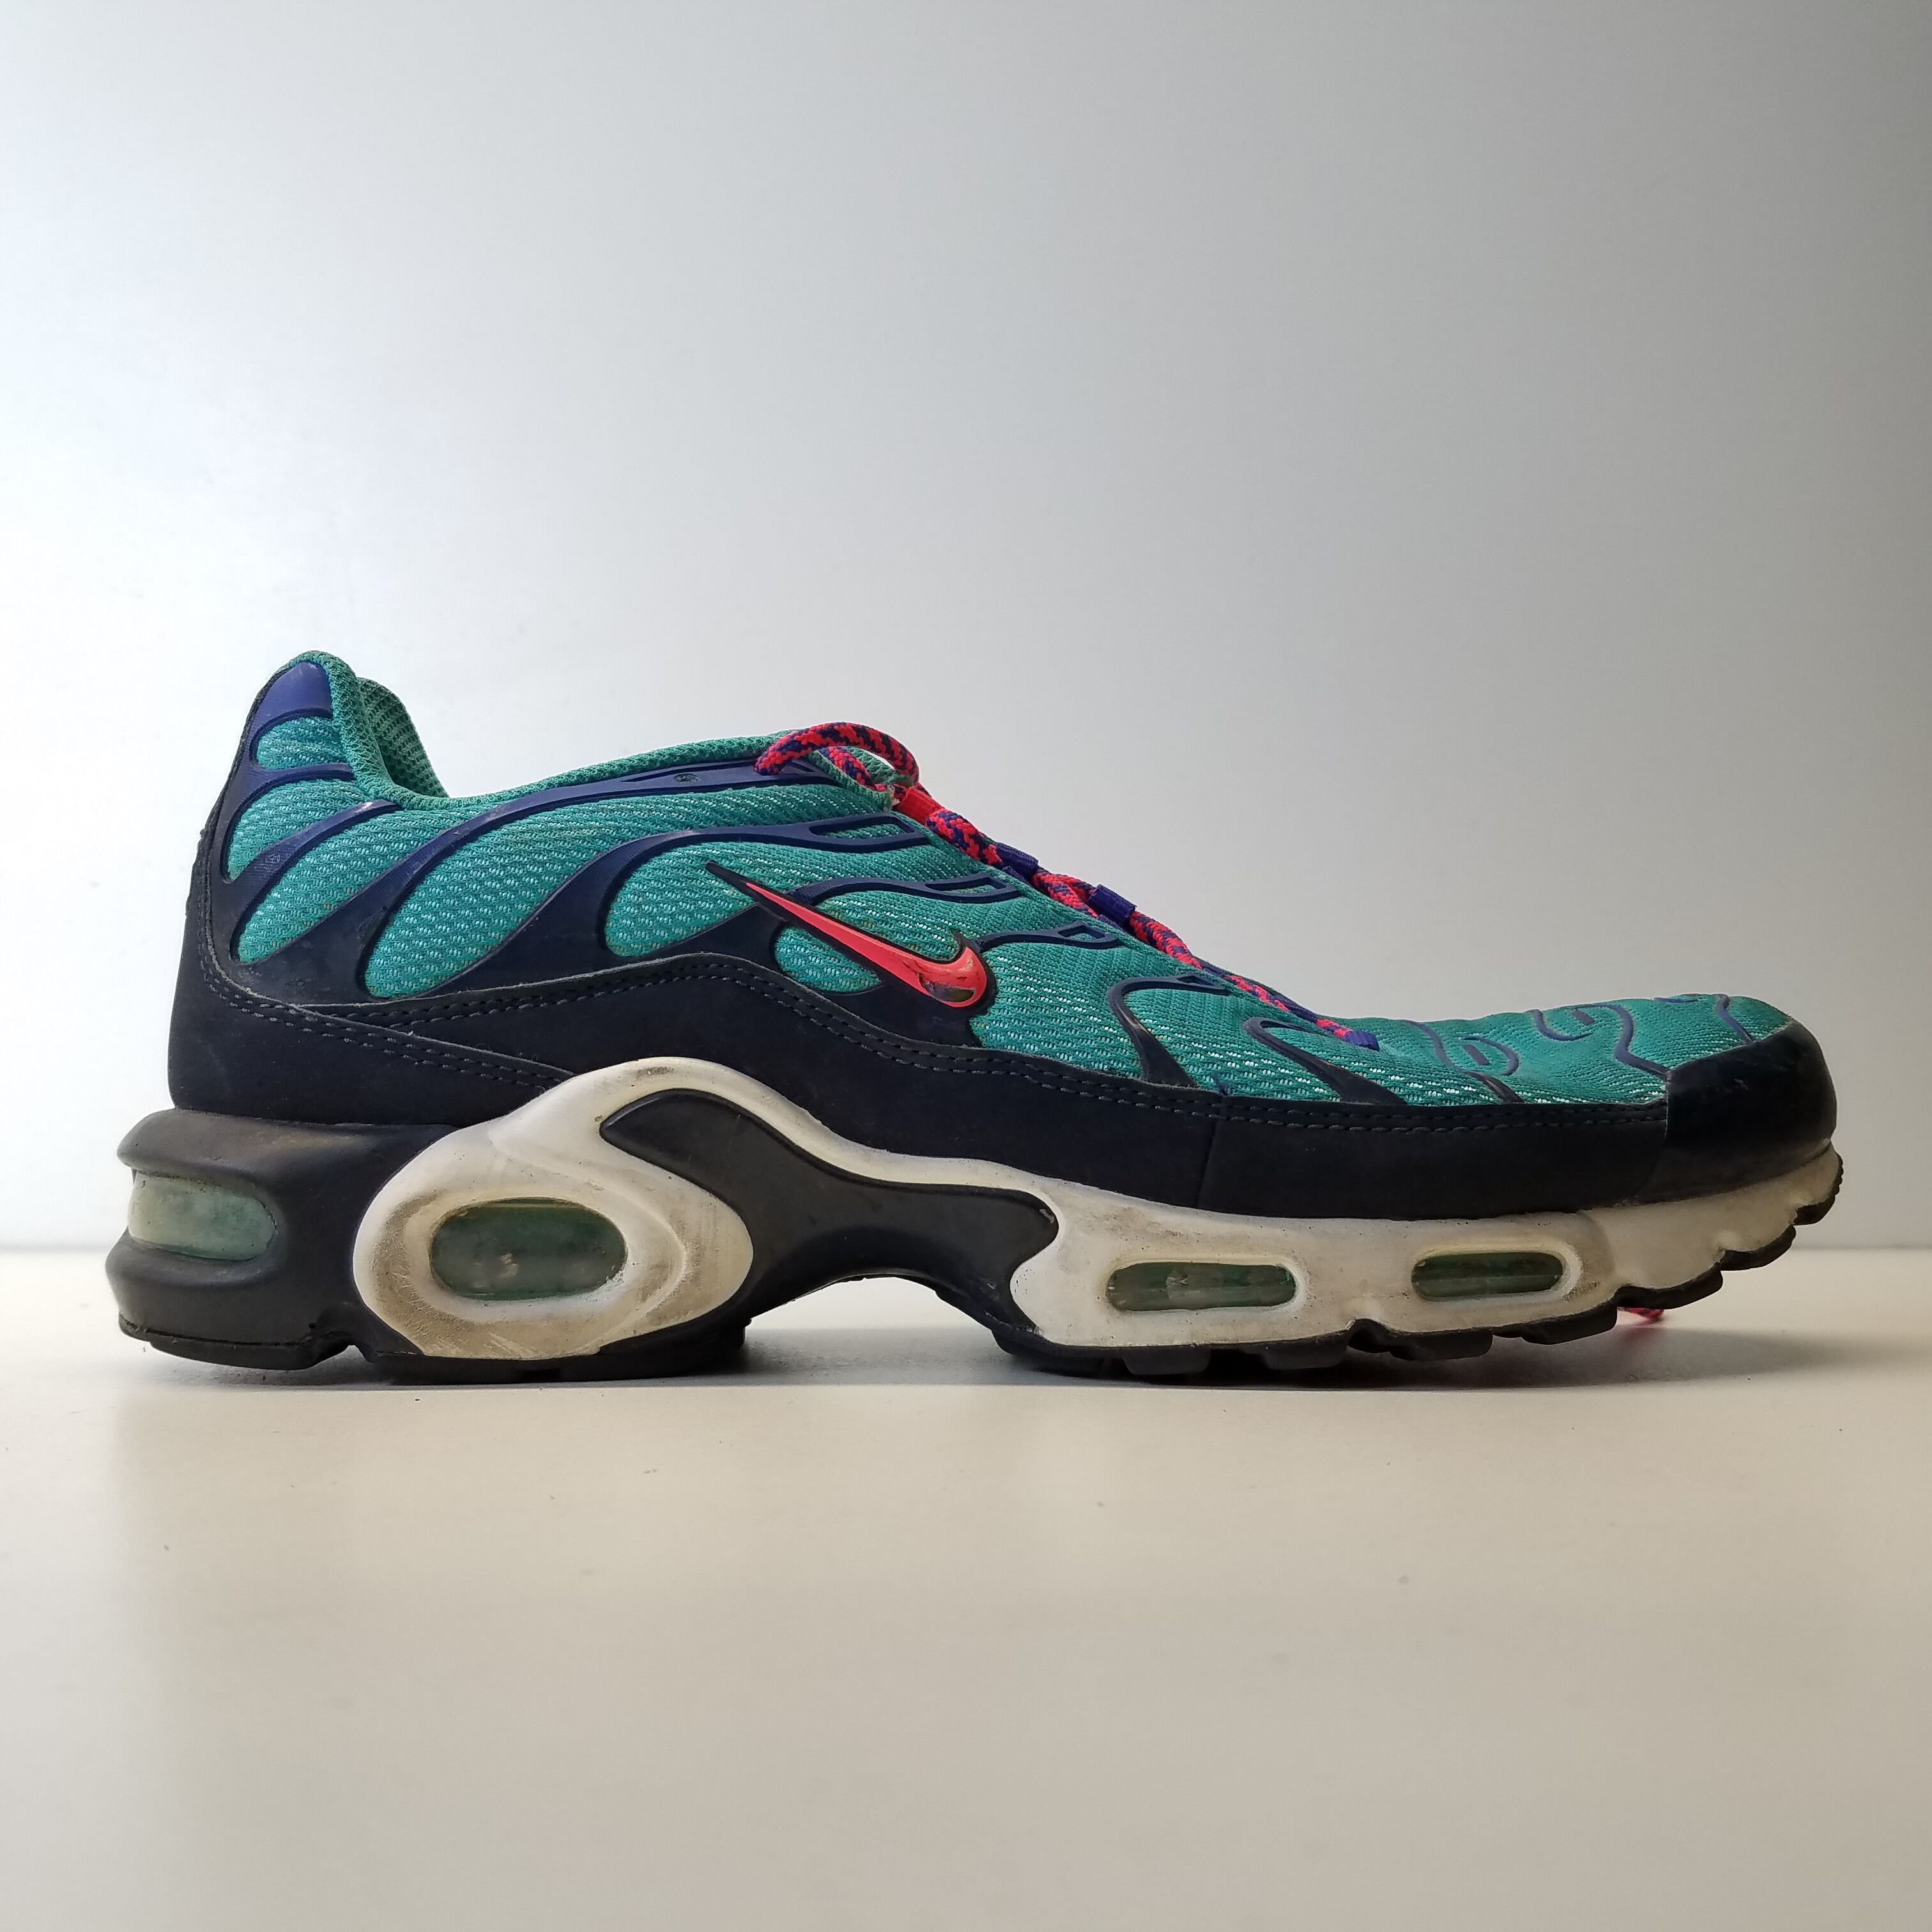 Buy the Nike Air Max Plus Discover Your Air Men Shoes Hyper Jade